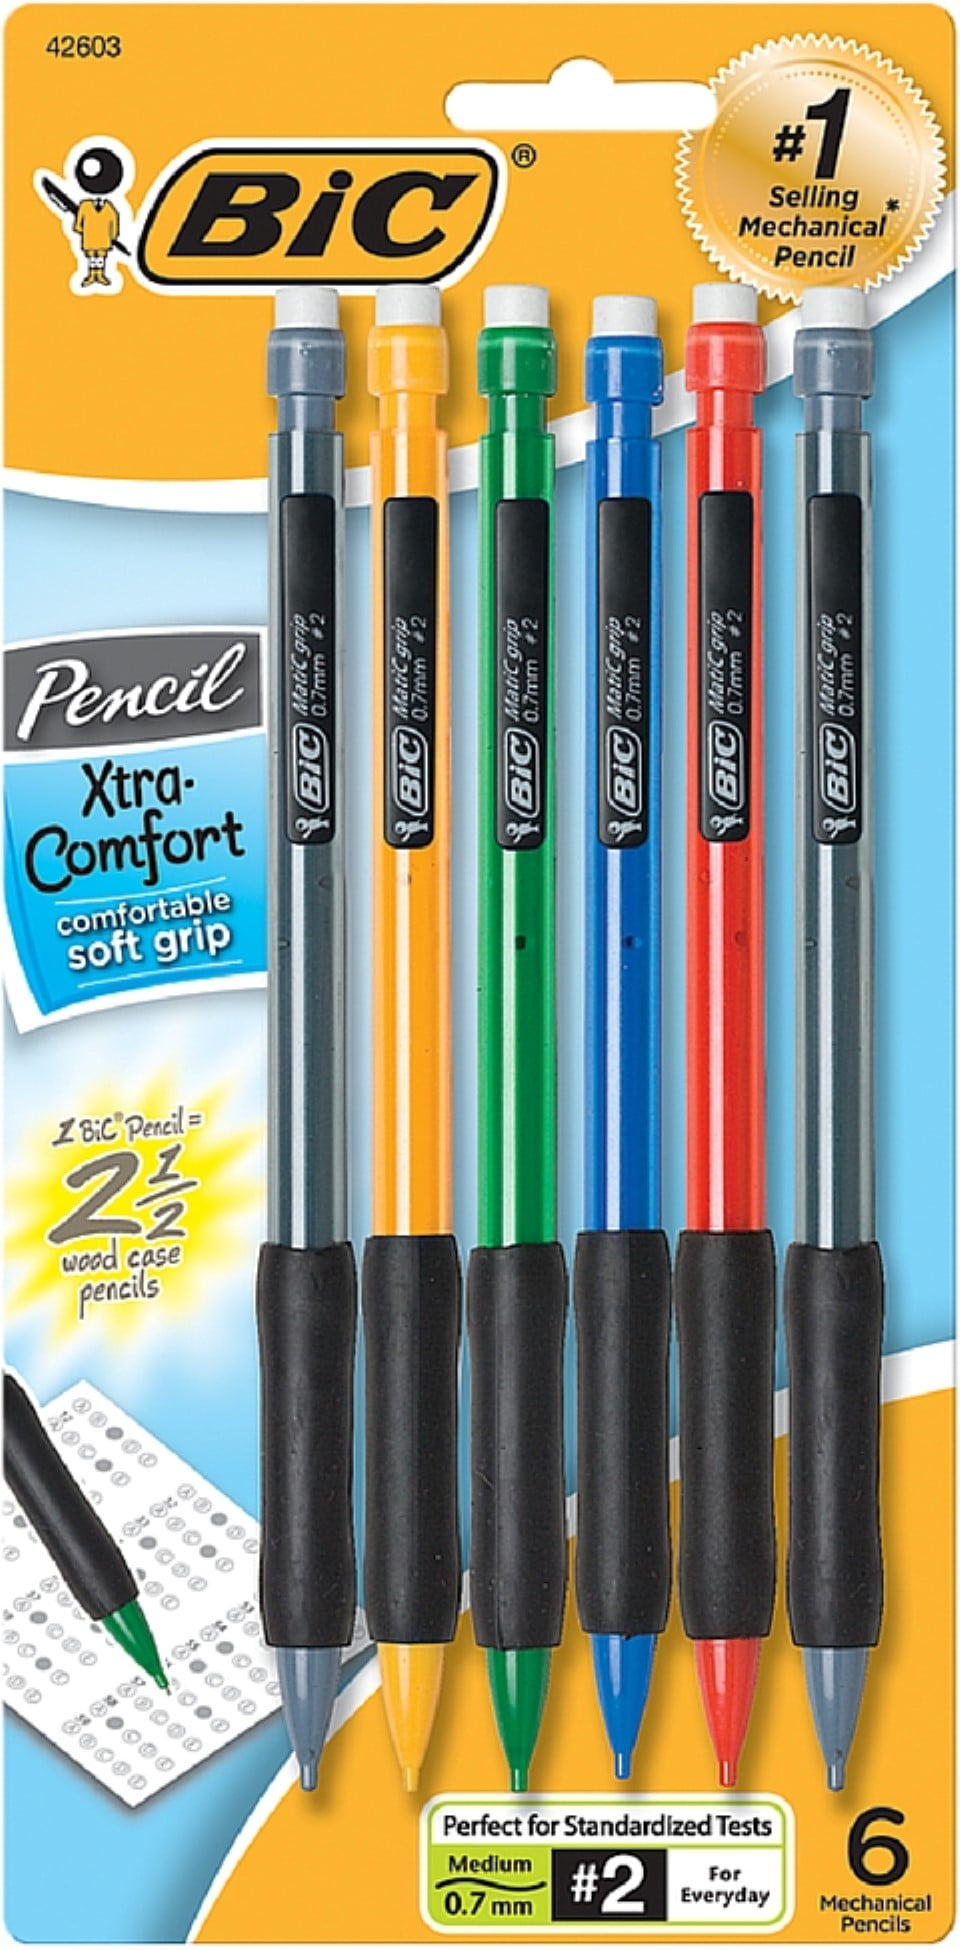 Bic Pencil Xtra Comfort with Grips Pens And Pencils 